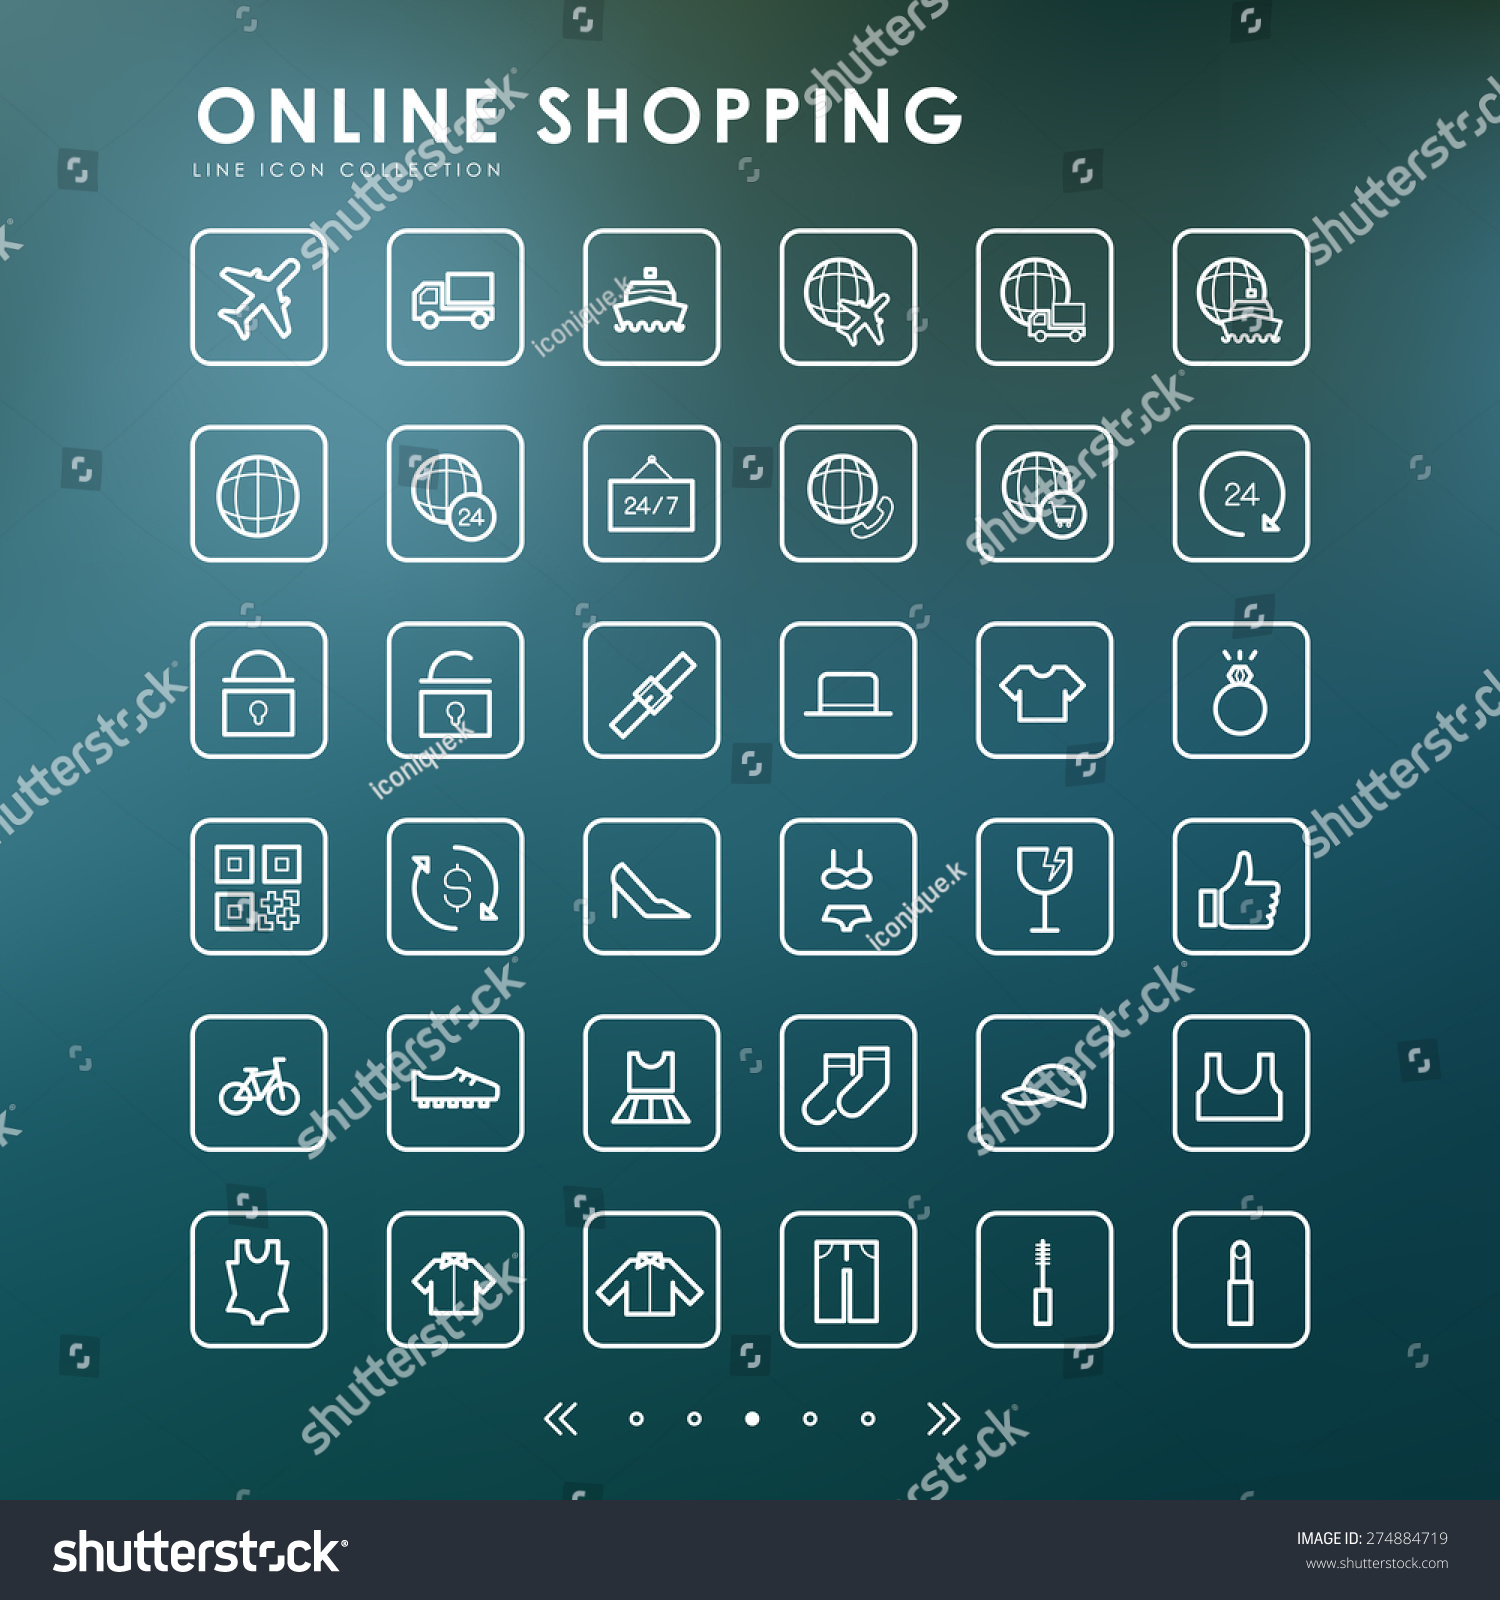 Online Shopping Minimal Line Icons Blur Stock Vector 274884719